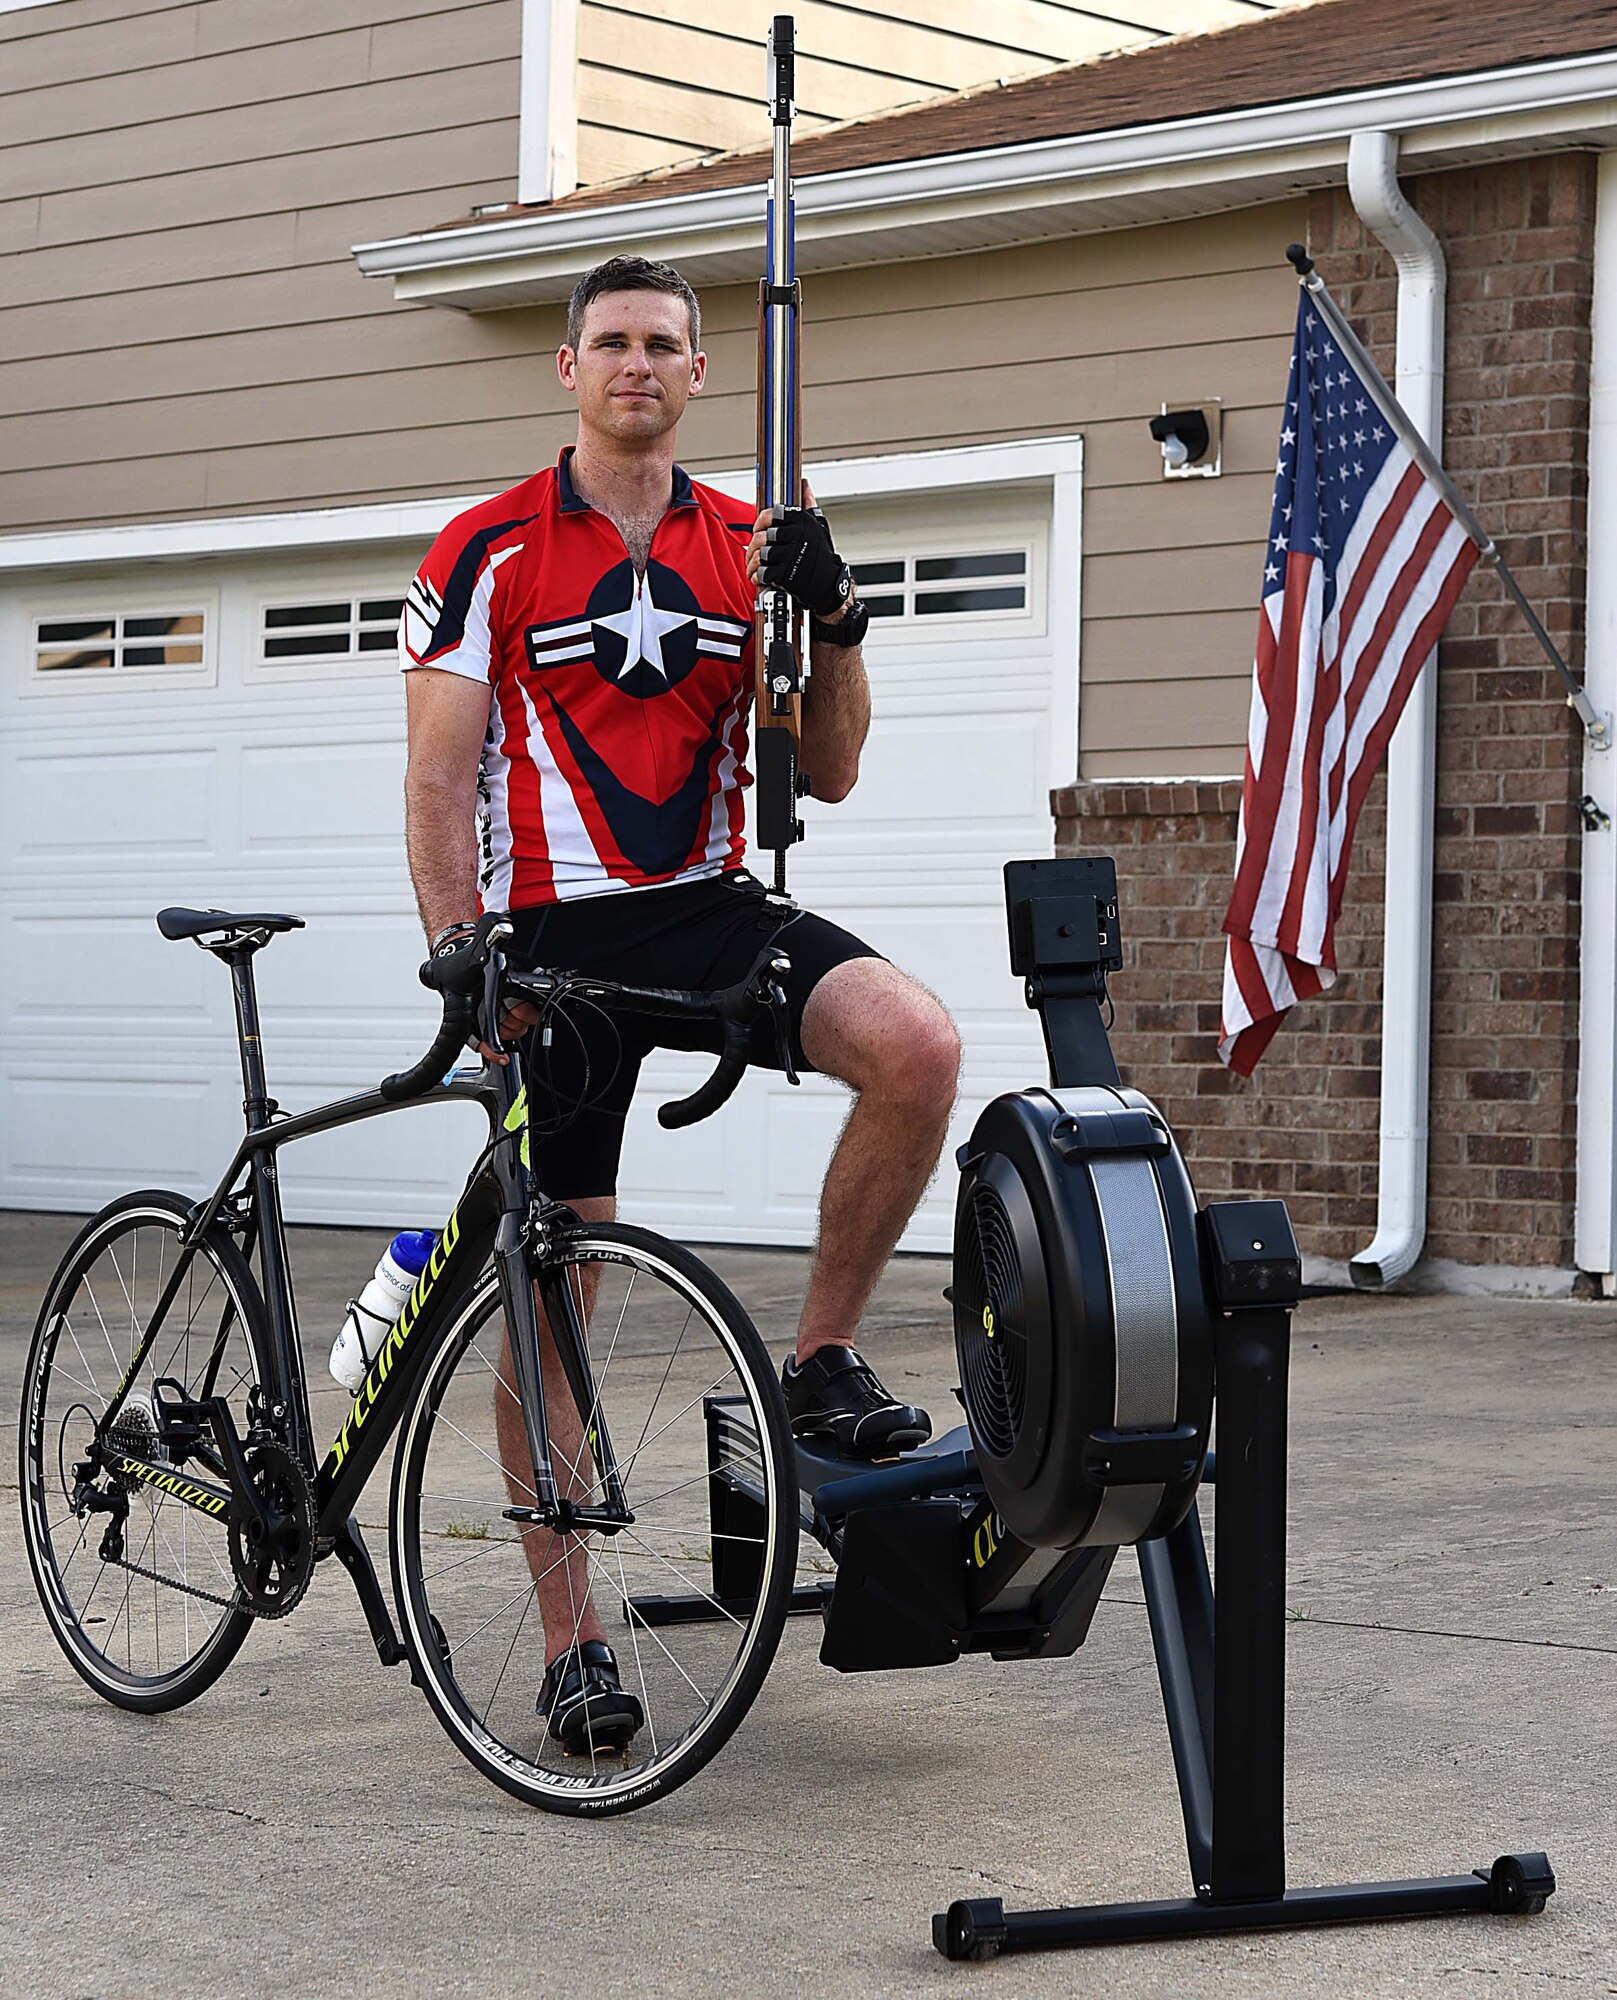 Capt. Hunter Barnhill, 37th Flying Training Squadron instructor pilot, stands with his training equipment May 15, 2018, on Columbus Air Force Base, Mississippi. Barnhill qualified for the Air Force Wounded Warrior team in the shooting, cycling and indoor rowing events. He will be competing in all three events at the 2018 Warrior Games June 1-9 at the U.S. Air Force Academy in Colorado Springs, Colorado. (U.S. Air Force photo by Airman 1st Class Keith Holcomb)